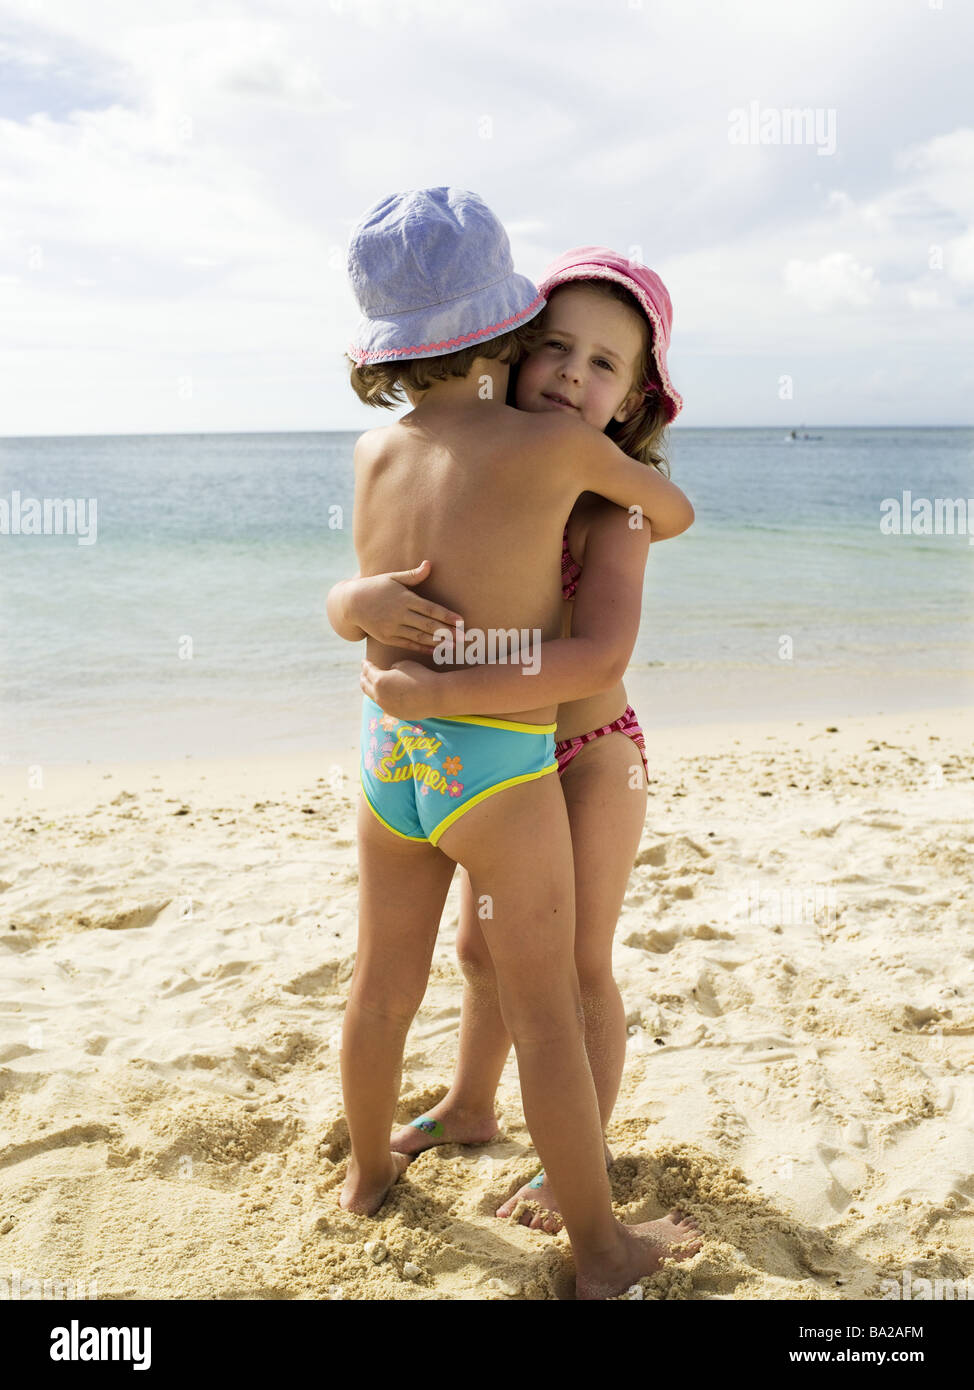 Sandy beach children bath-clothing embrace series beach sand 5-6 years  girls sisters twins friends friendship happily vacation Stock Photo - Alamy